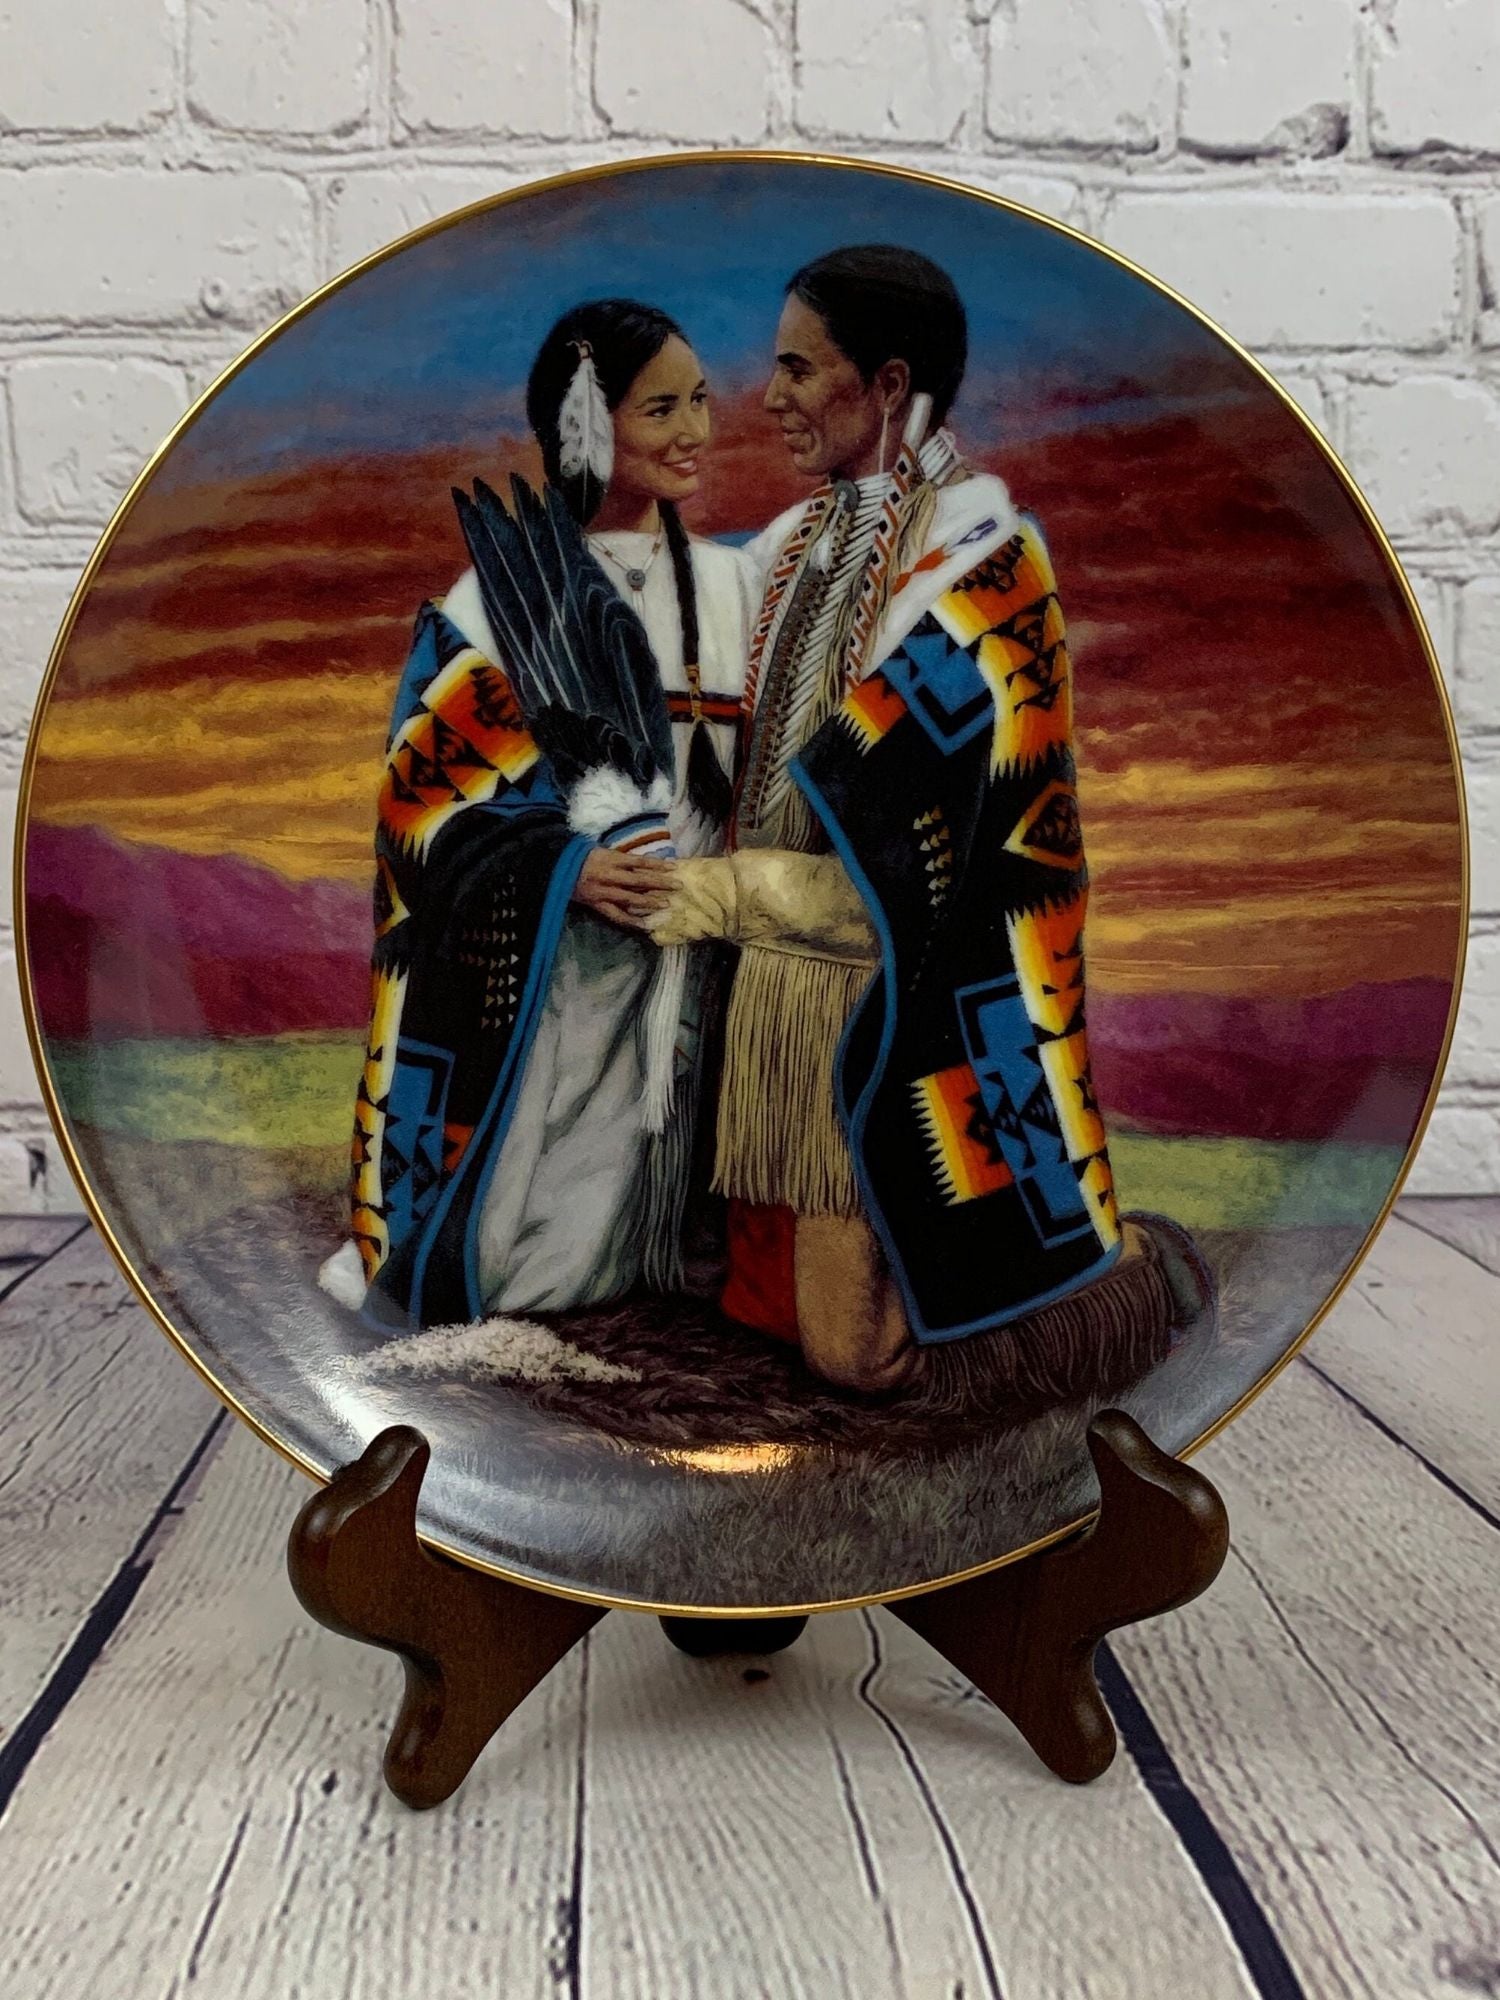 Vintage Native Collectible Plate #2184A, The Marriage Ceremony, Hamilton-Proud Indian Families 1992